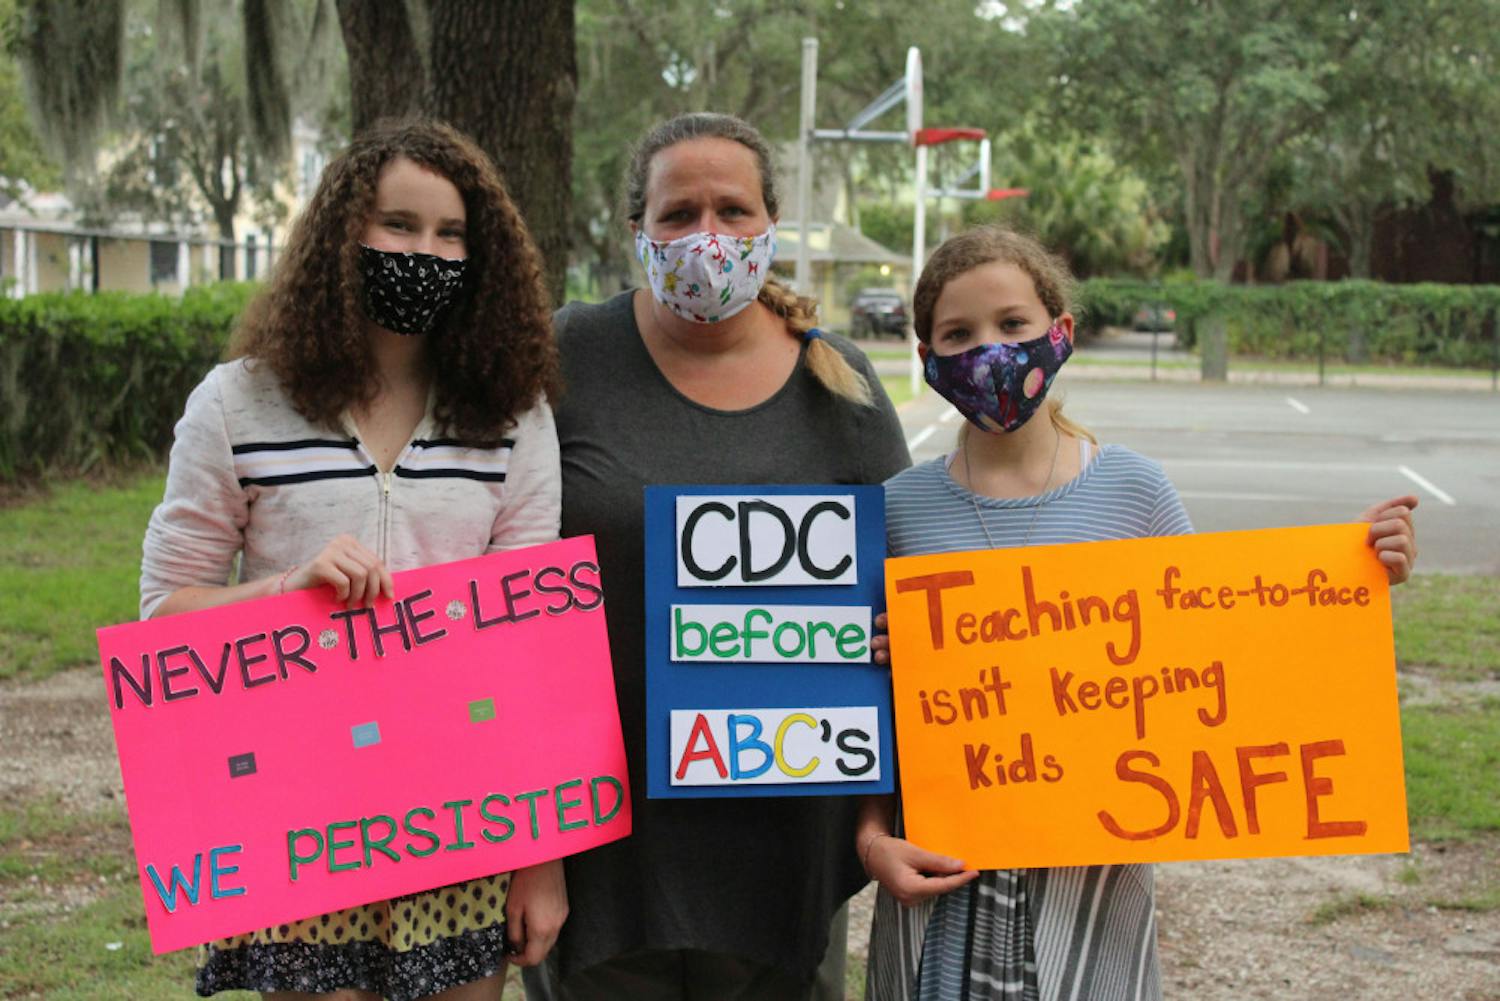 Teachers, parents and students attended the Rally for Safe Reopening of Schools on July 21. The rally comes as the rate of positive COVID-19 cases surges in Florida. Attendees expressed concerns over the safety of themselves and their families upon returning to school in August. 
“We either go digital, or go home,” one attendee said. 